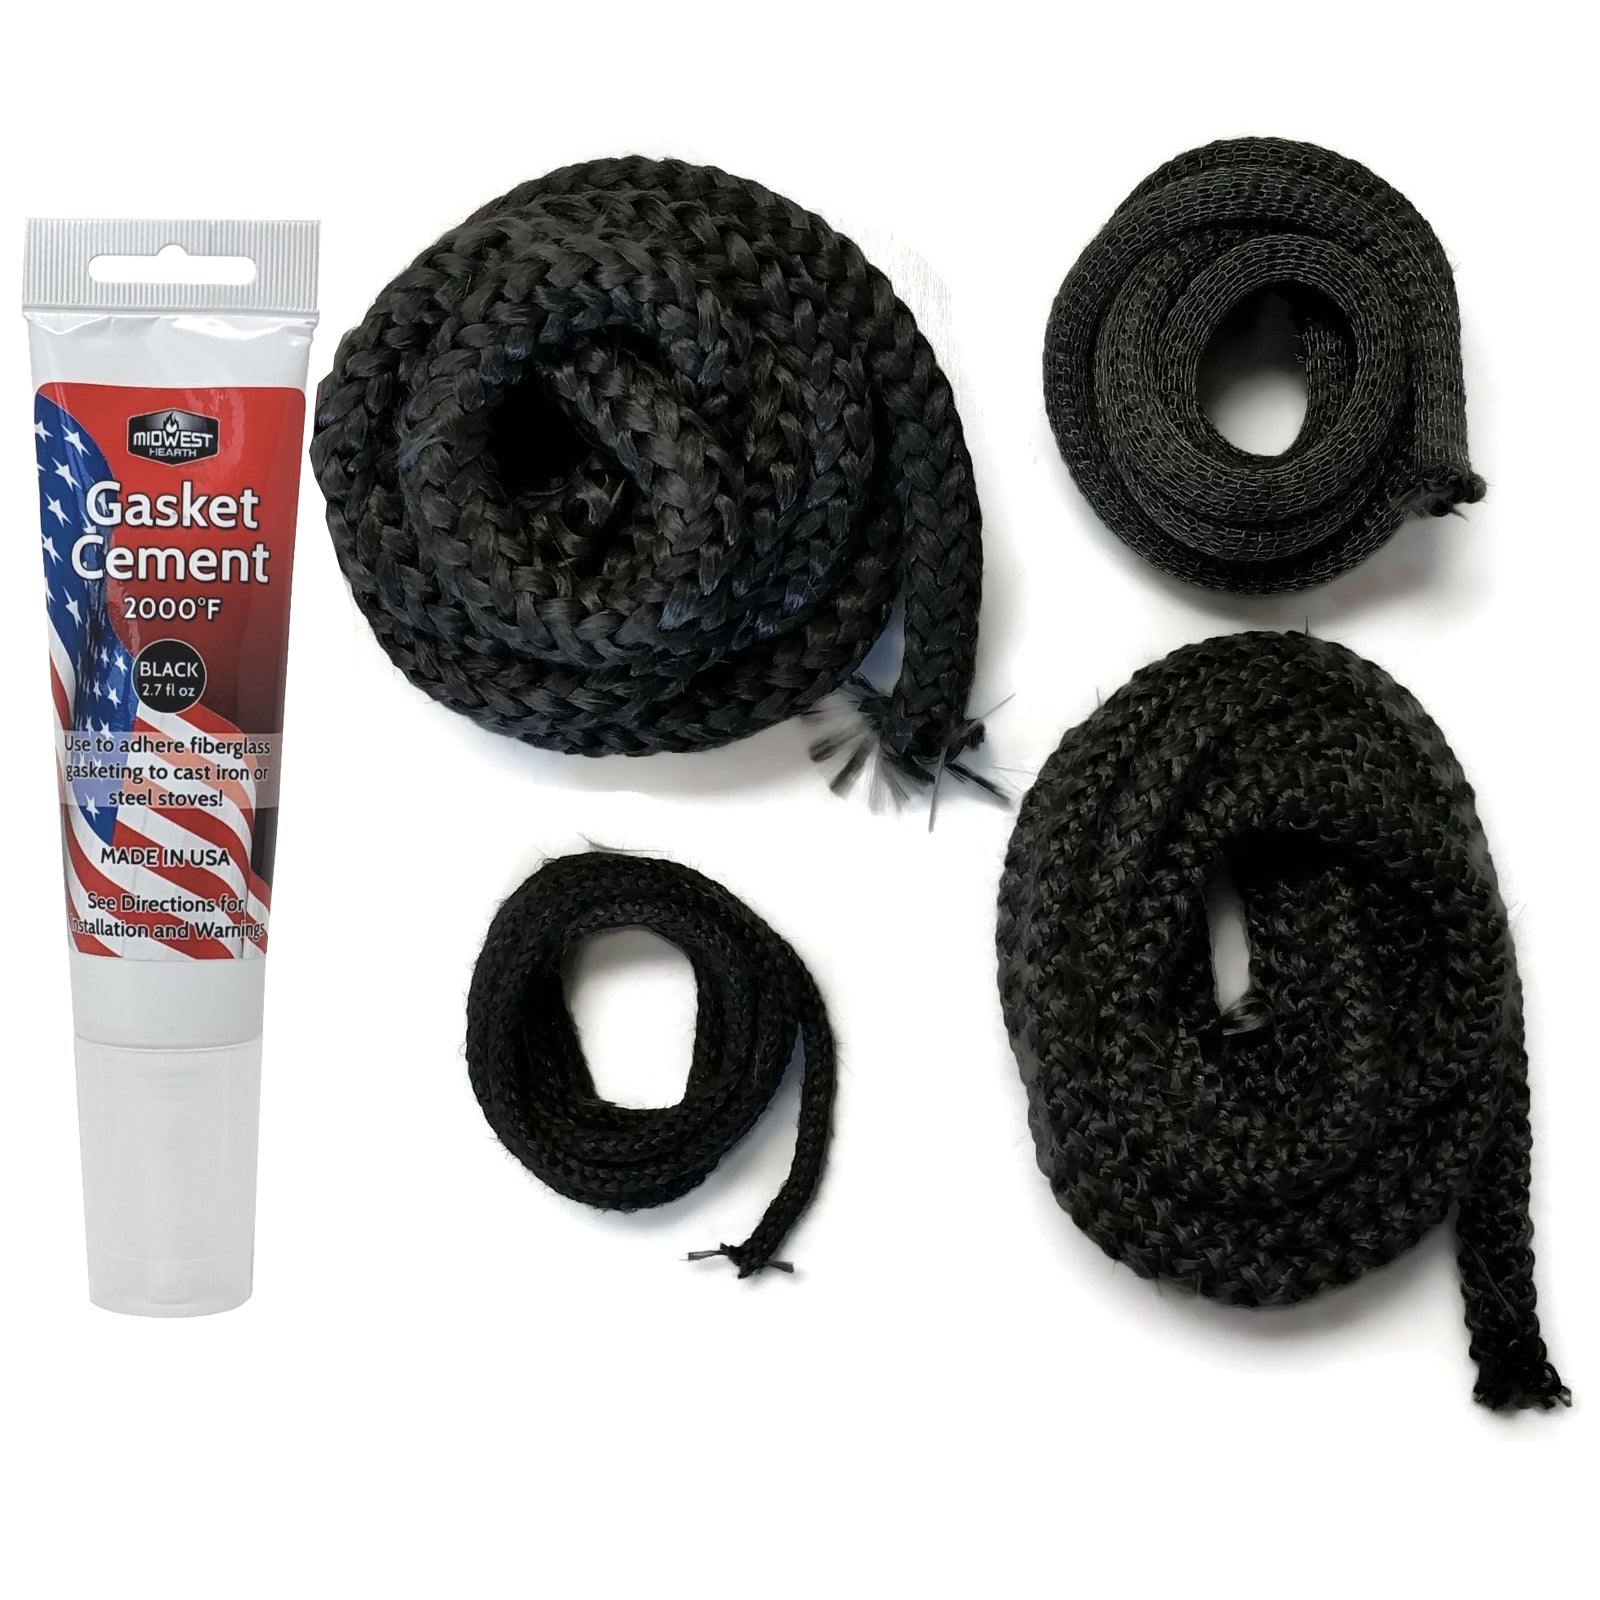 Valcourt Black Gasket And Silicone Kit 3/16 X 5' – US Fireplace Store